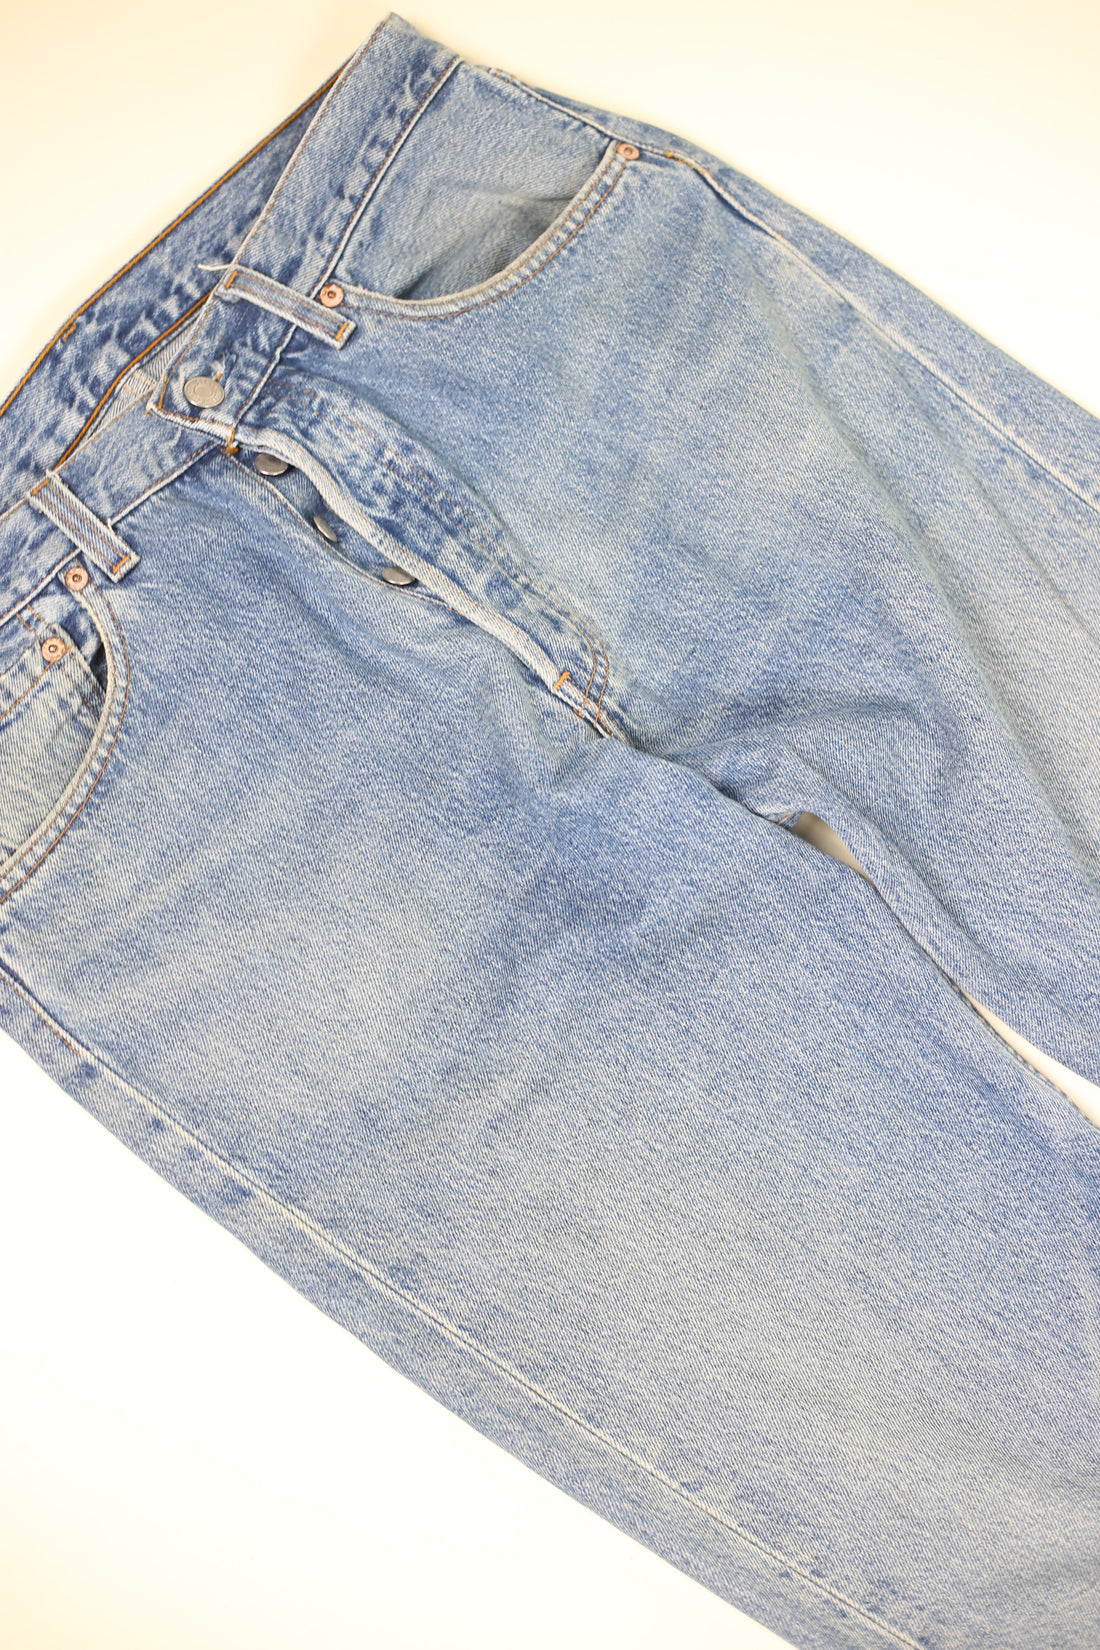 Levis 501 Made in Usa - W33 -